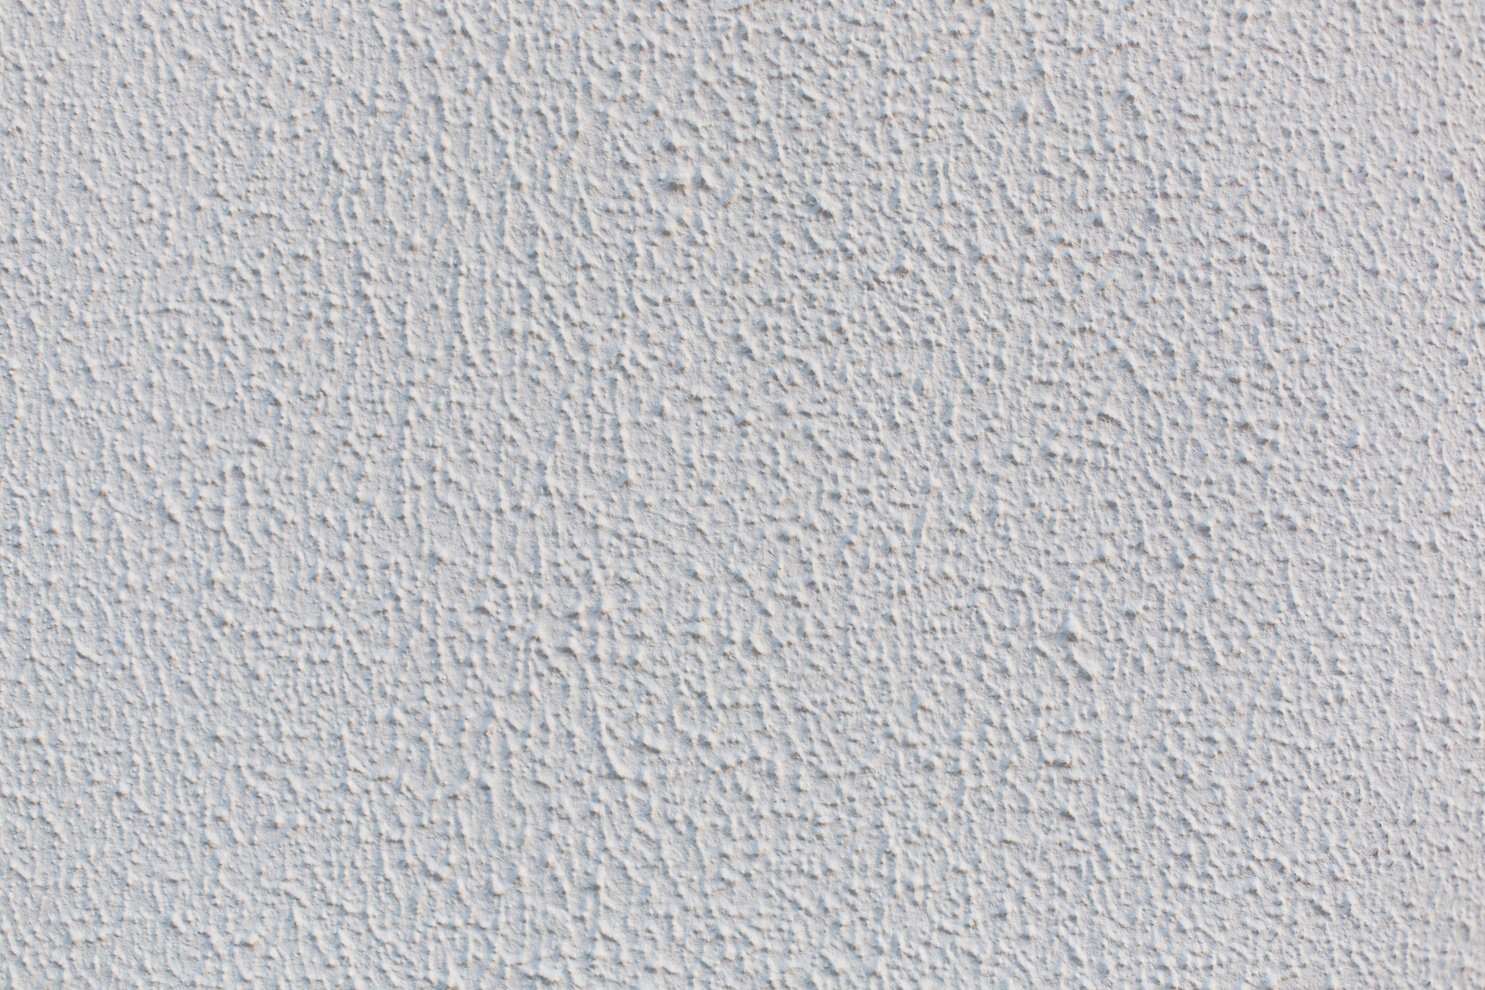 White popcorn ceiling wall